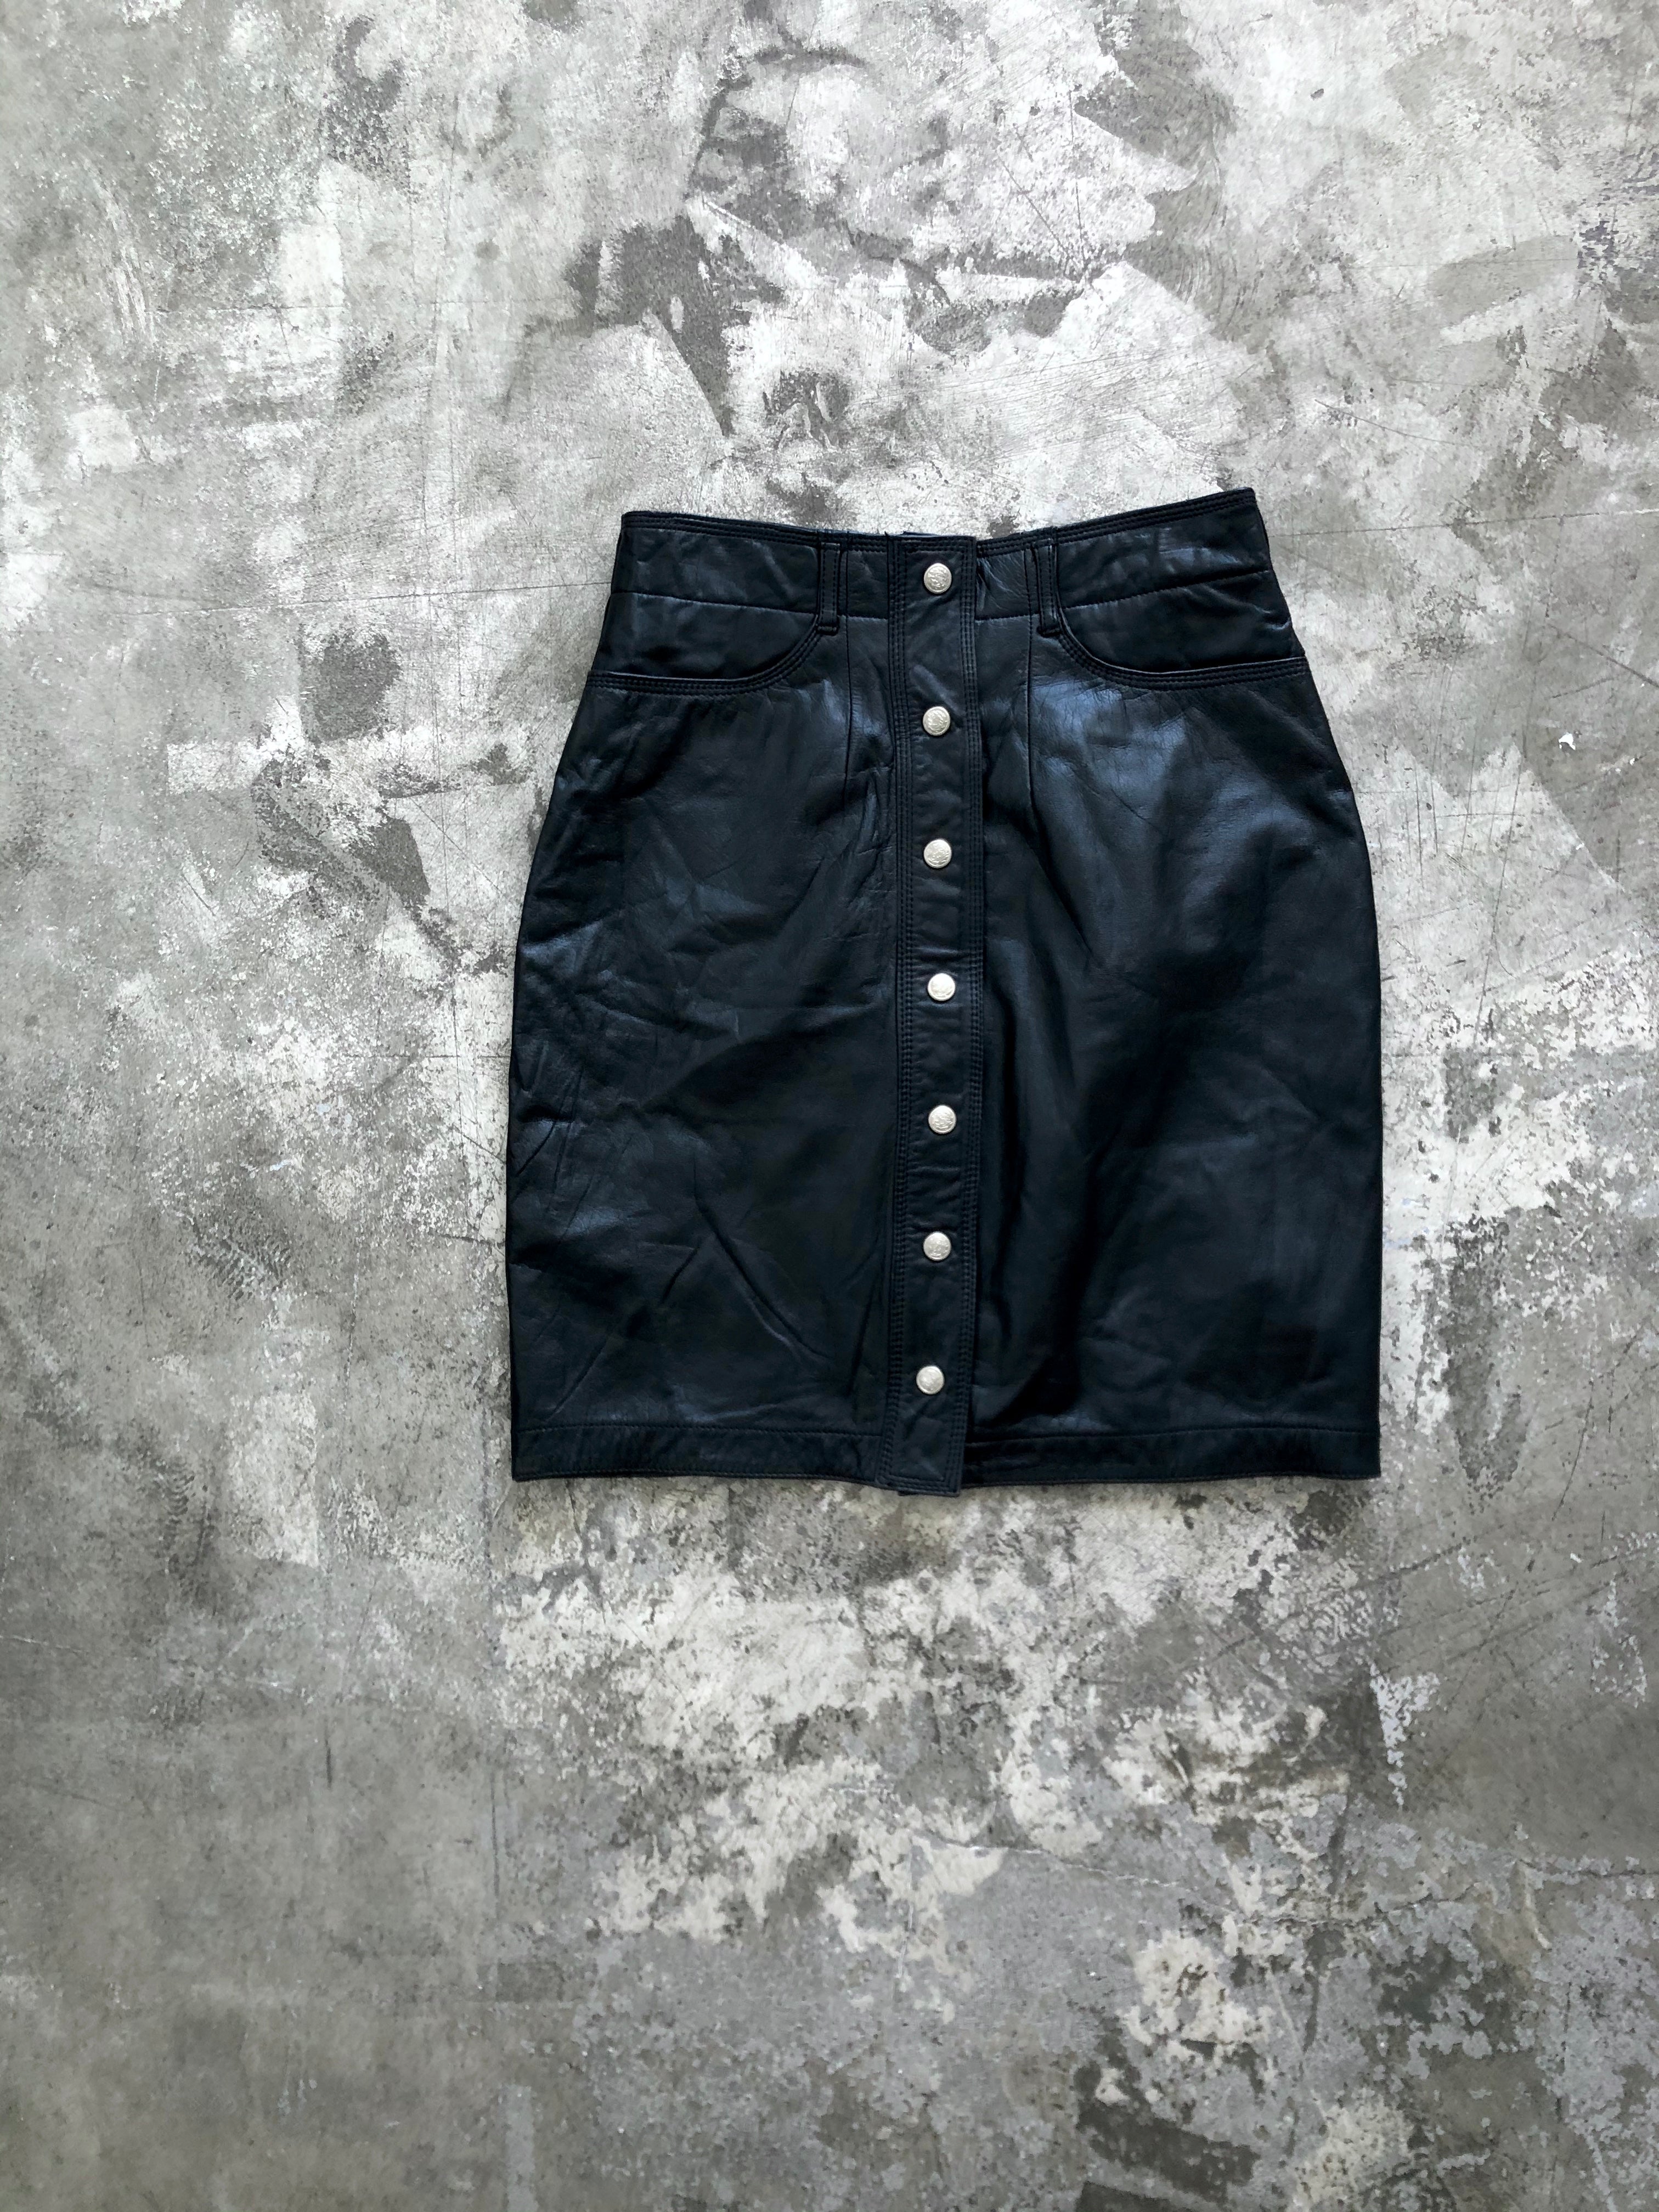 black leather skirt with snap fastener